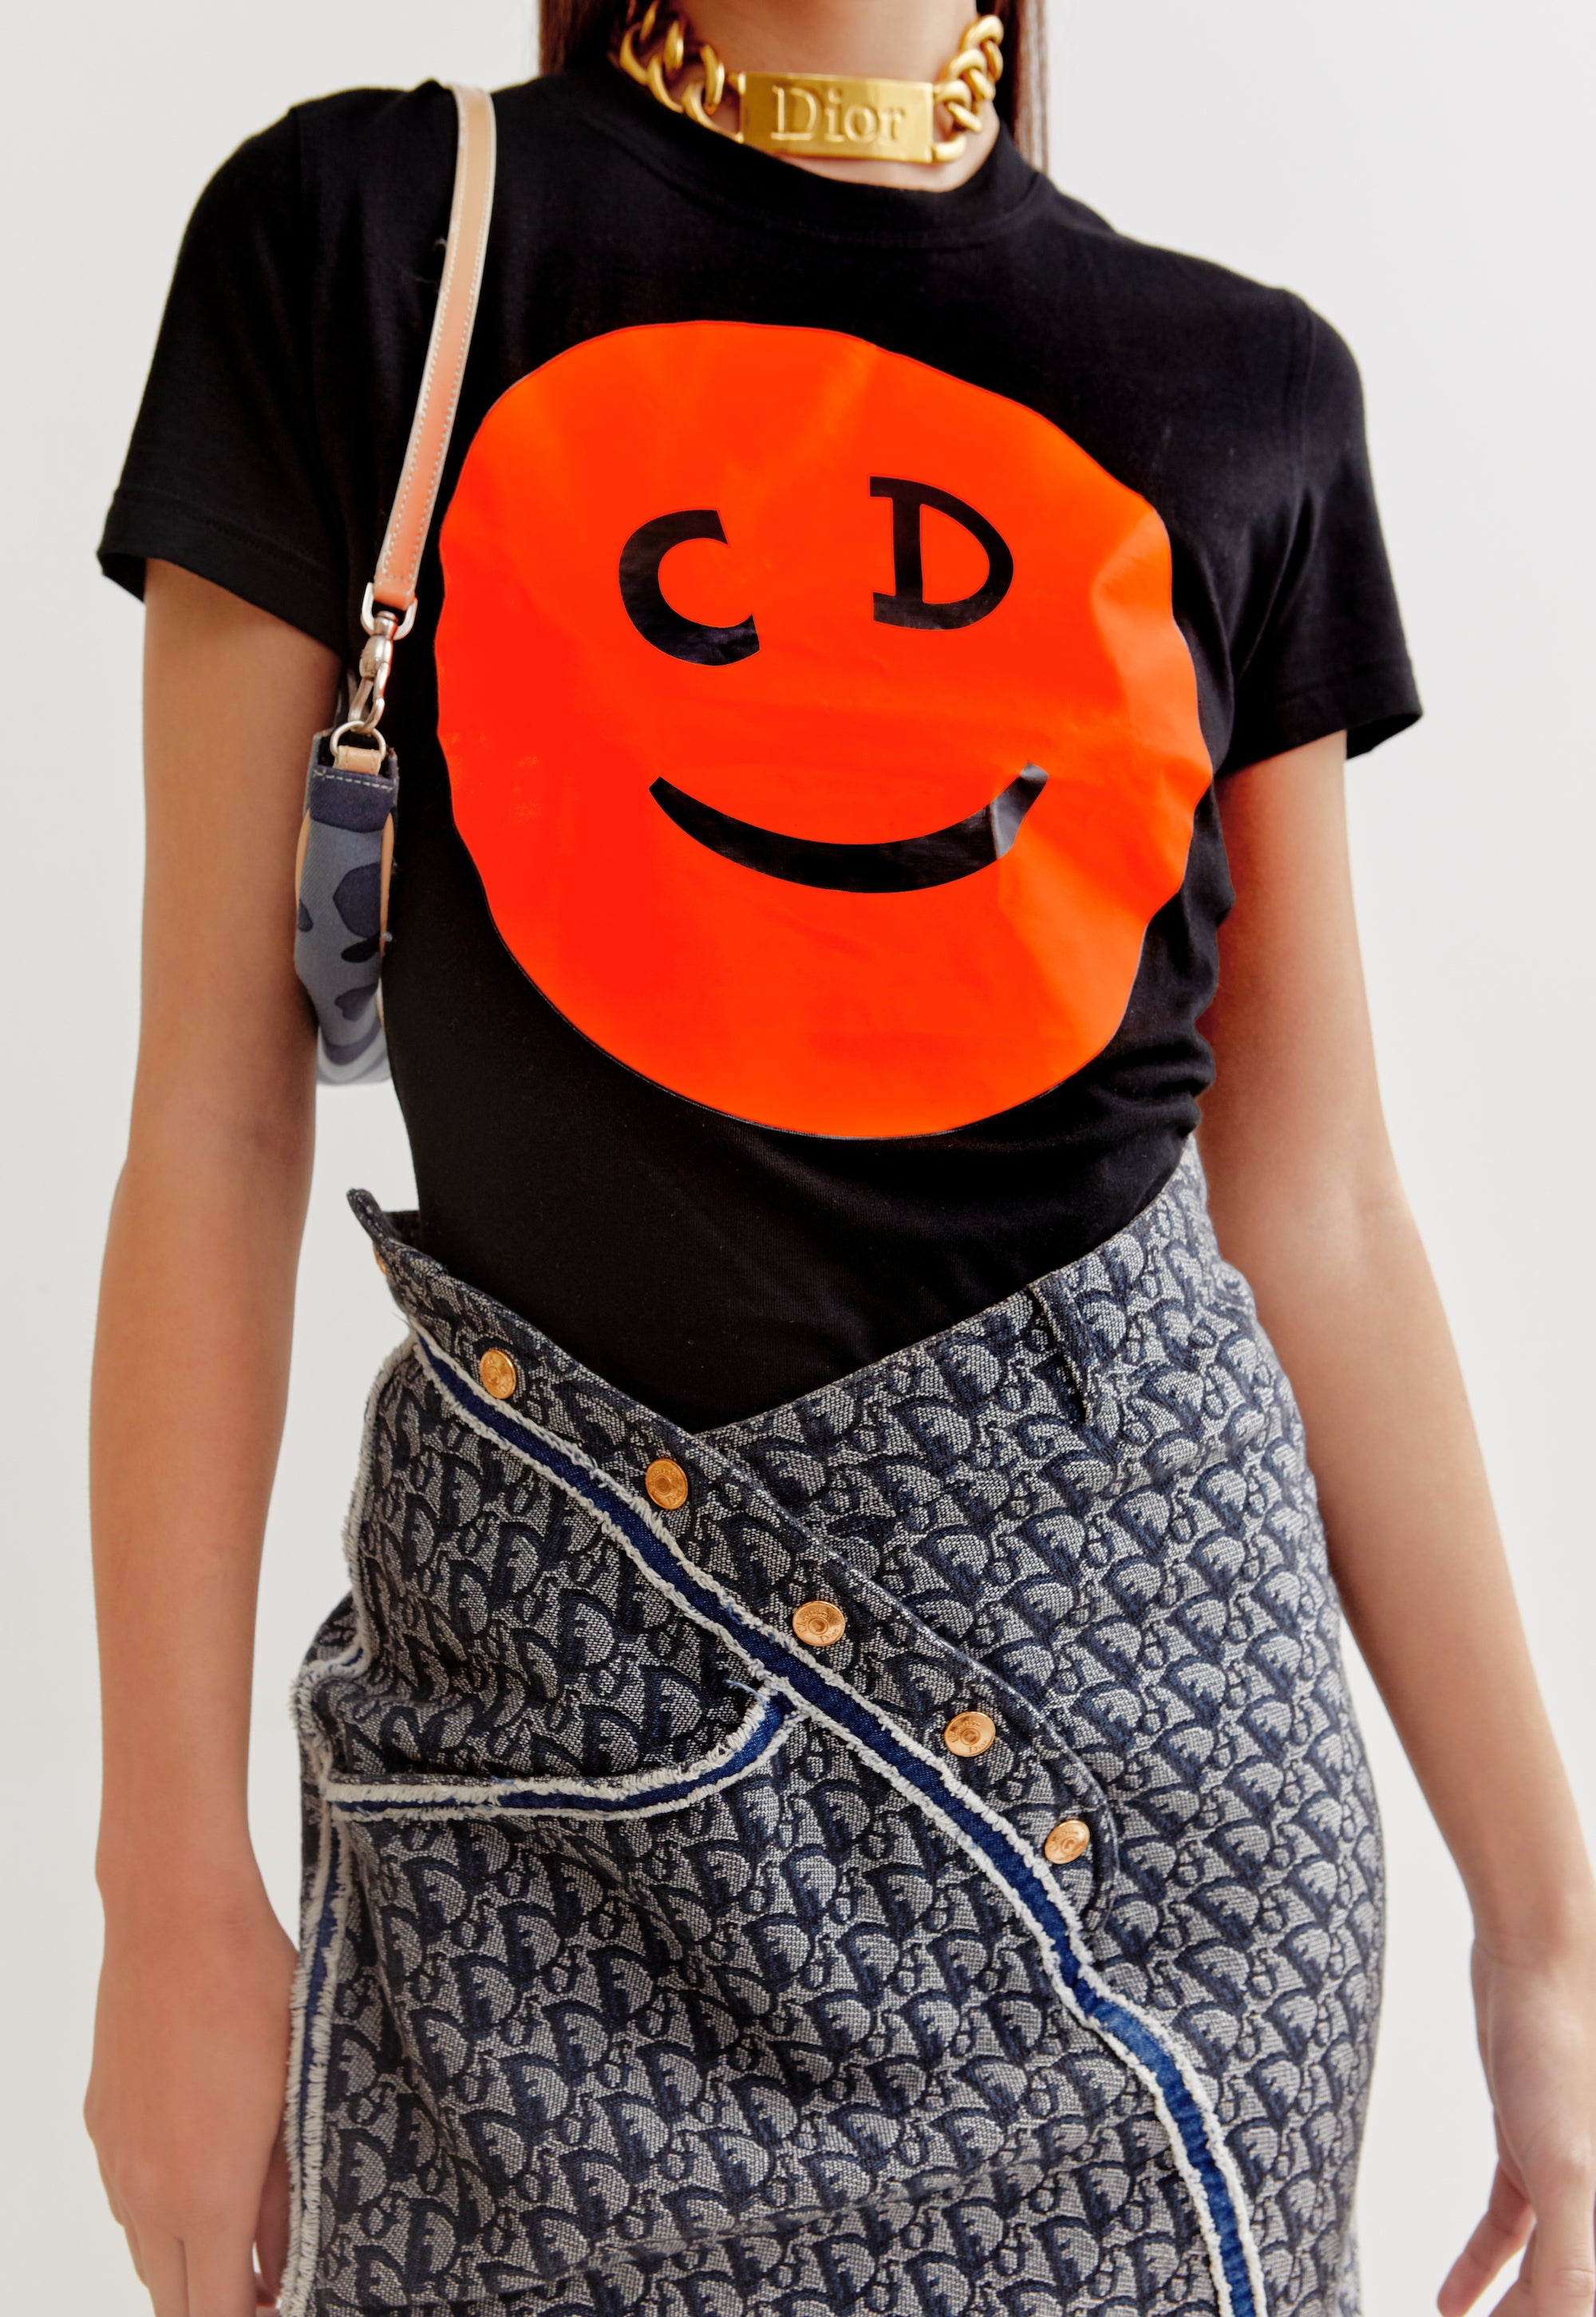 Christian Dior <br> F/W 2001 'Global Raver' runway & campaign logo smiley face t-shirt